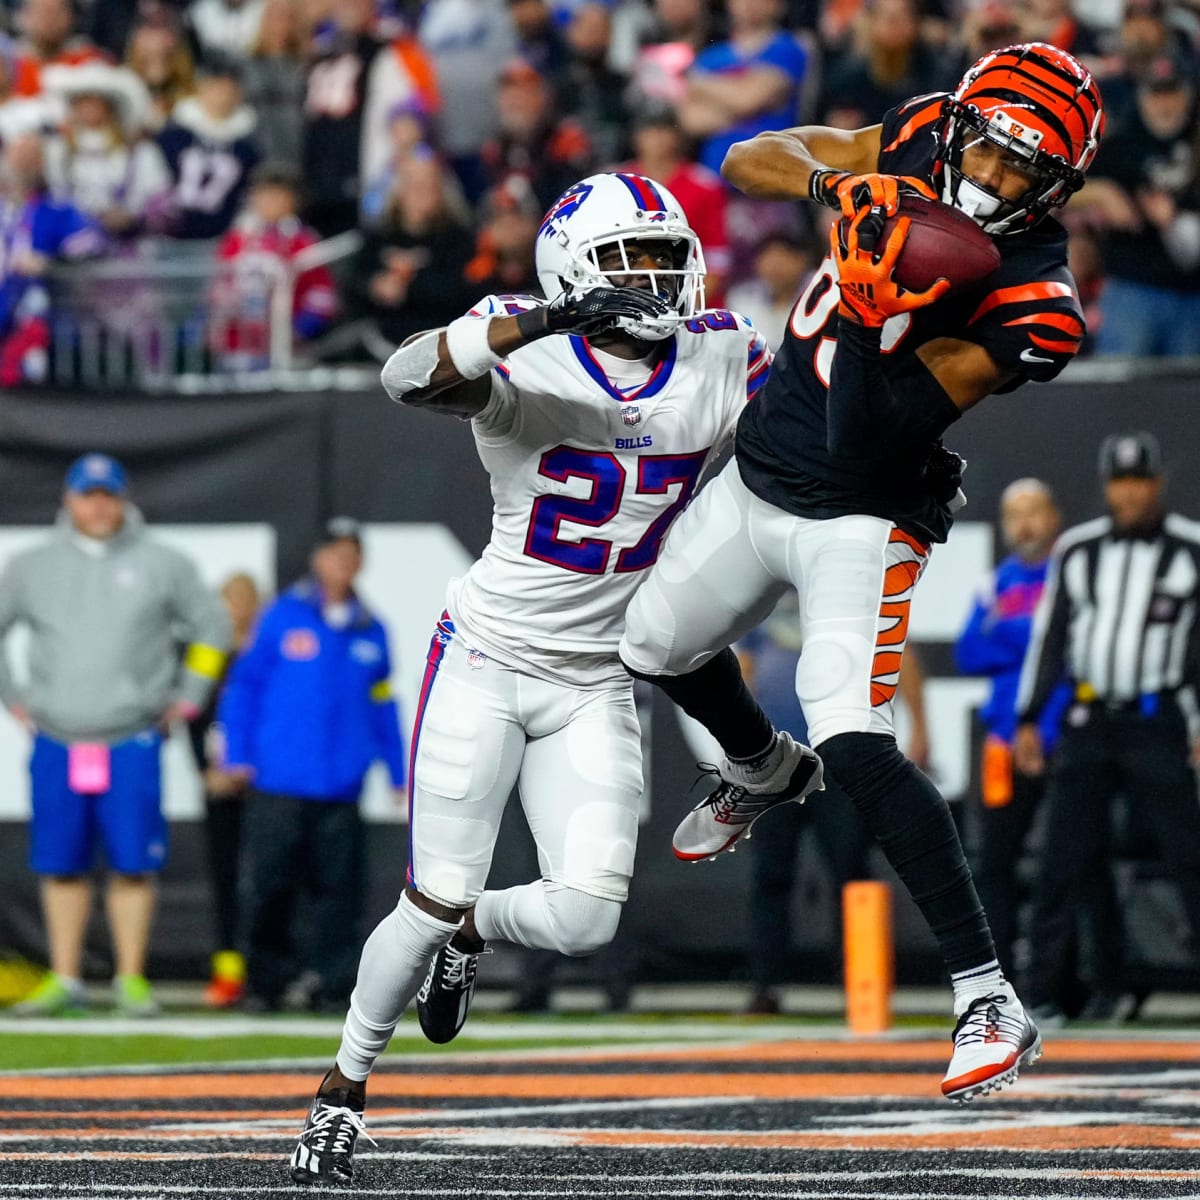 Bengals-Bills scheduling options after suspended game - Sports Illustrated